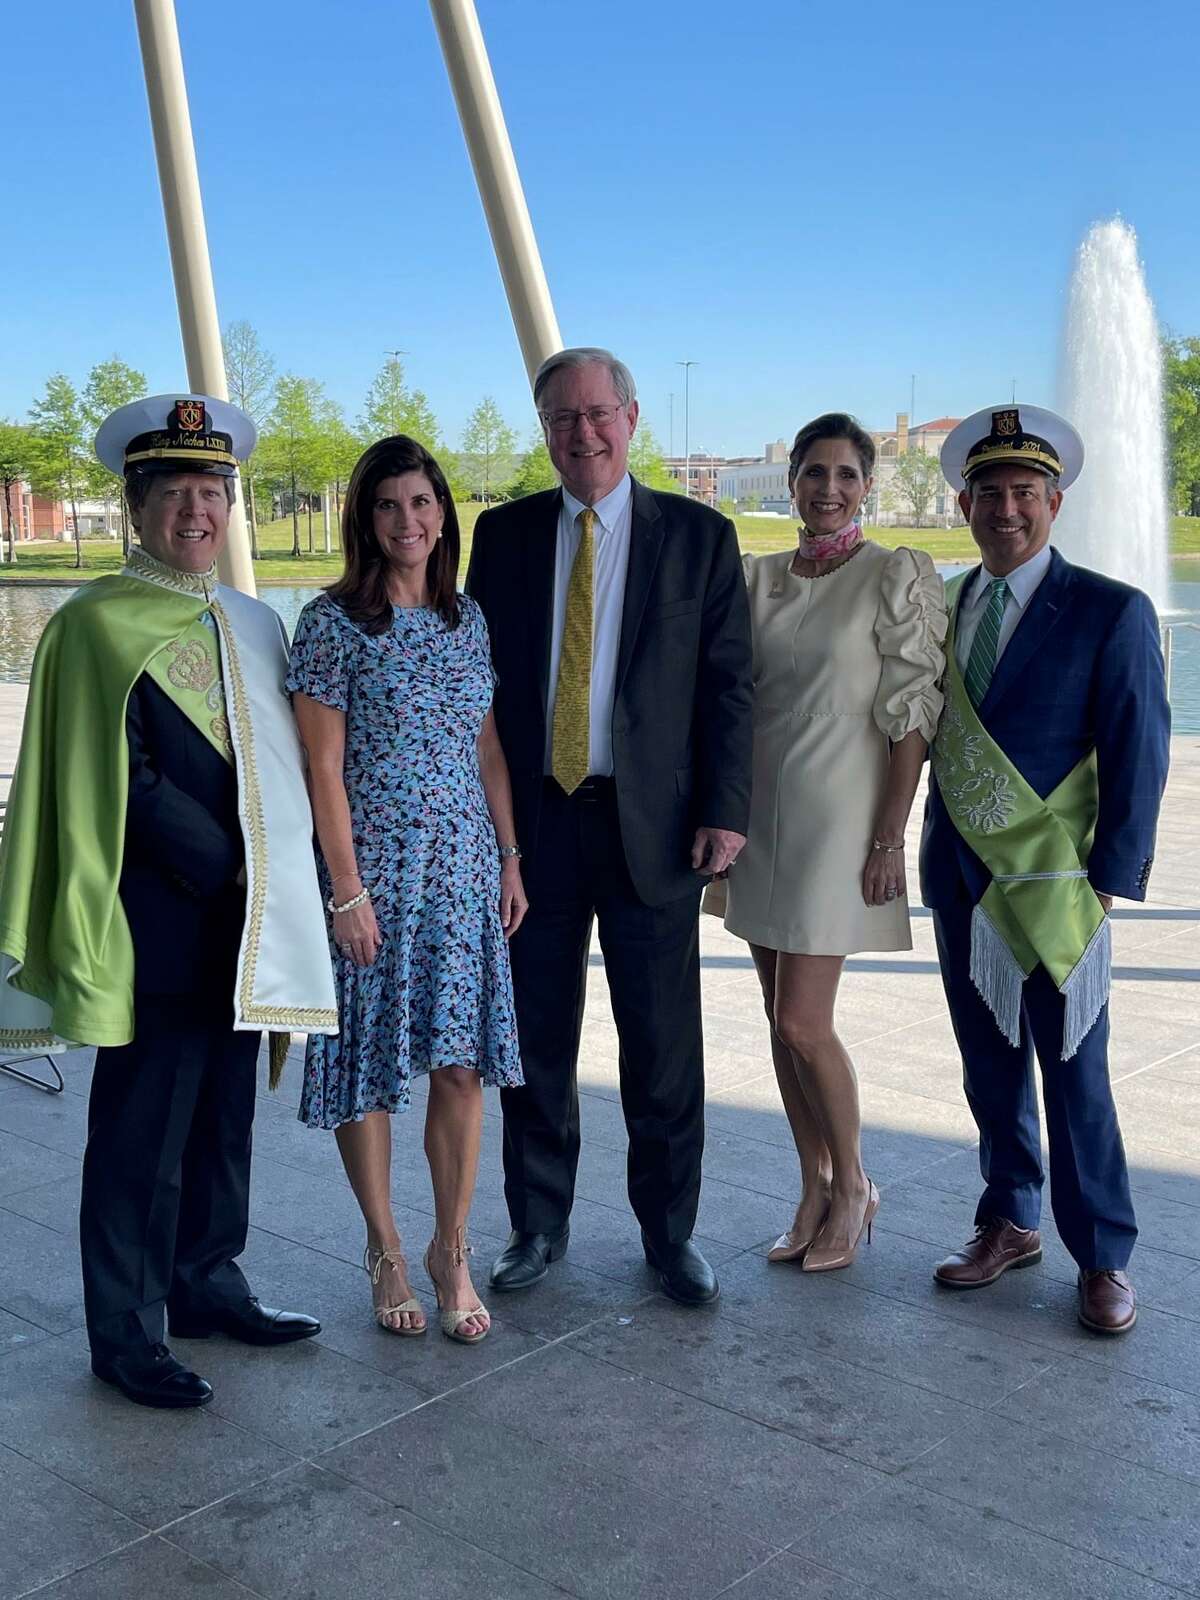 Greg Bostwick (middle) and his wife, Cindy Bostwick (second from left), at the Beaumont Event Center where the Neches River Fest named the KFDM meteorologist the 2021 Citizen of the Year on Thursday, April 8, 2021 in Beaumont, Texas.